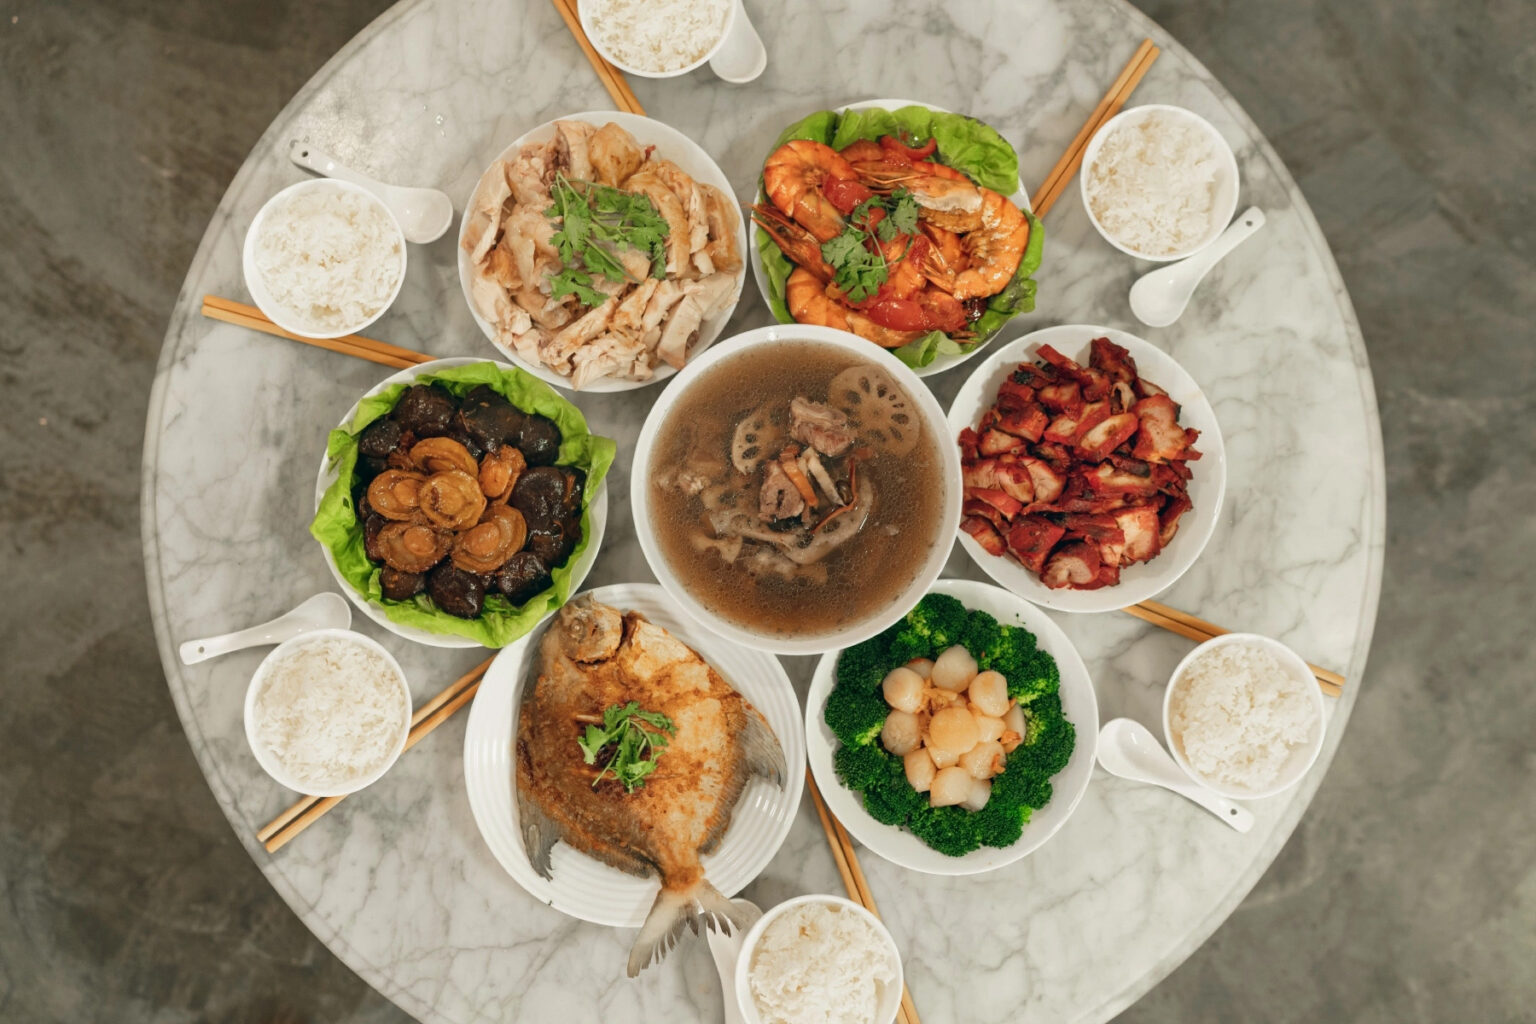 A Lunar New Year dinner spread with various Singaporean dishes on a circular table